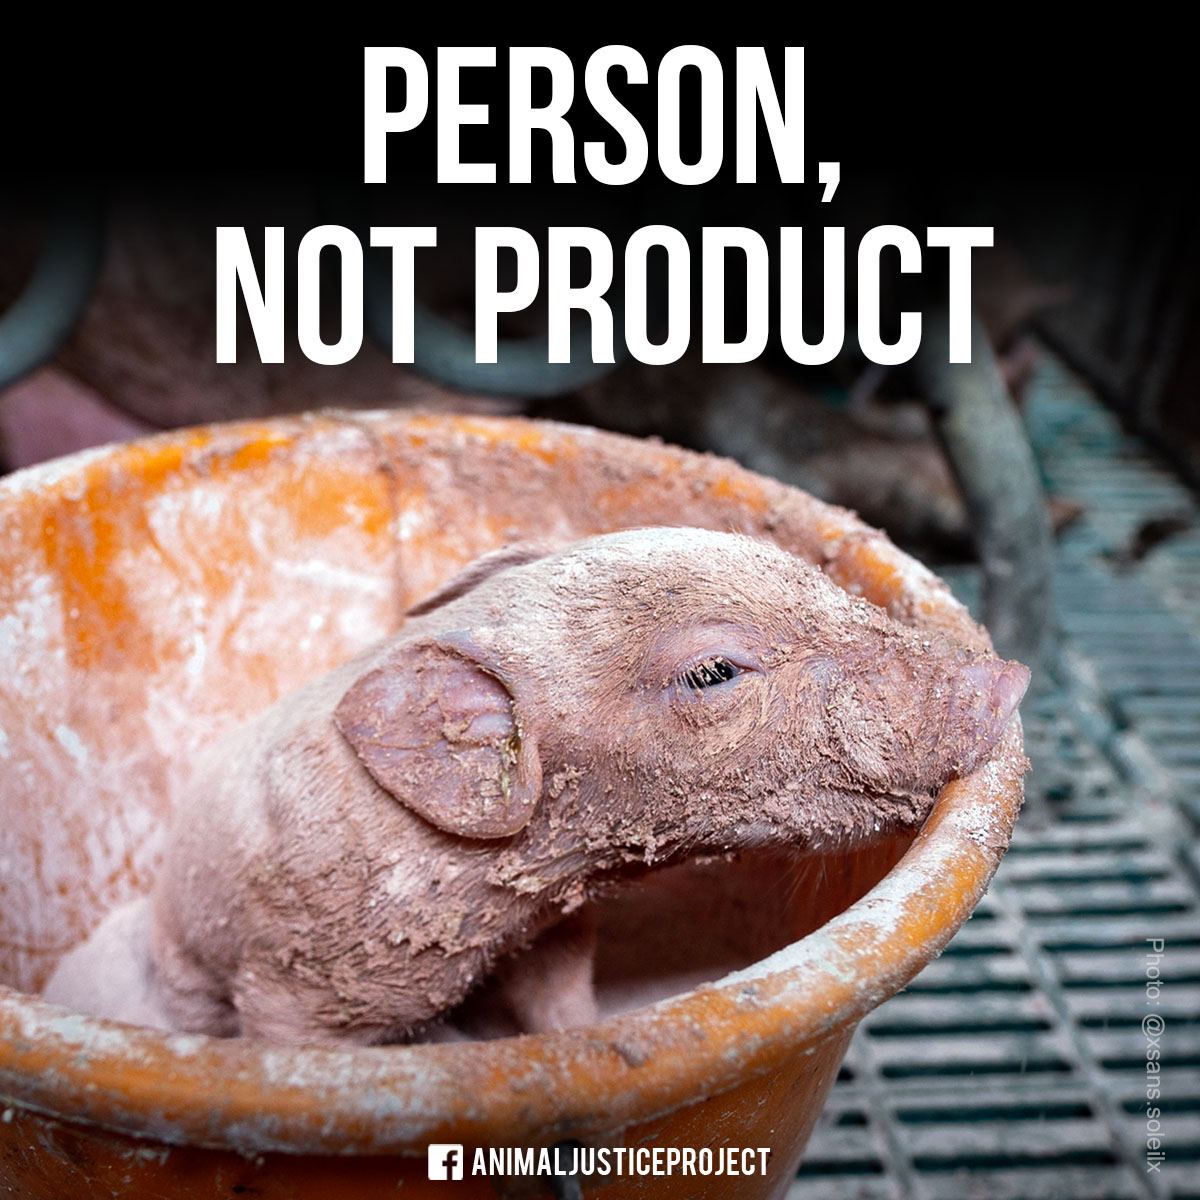 Animals are persons, not products! They are subjects of their own life. The laws that label them as property only serve humans who profit from exploiting and violating their rights!

animaljusticeproject.com
#AnimalRights #NonHumanPerson #AnimalSentience #Vegan #AnimalLover